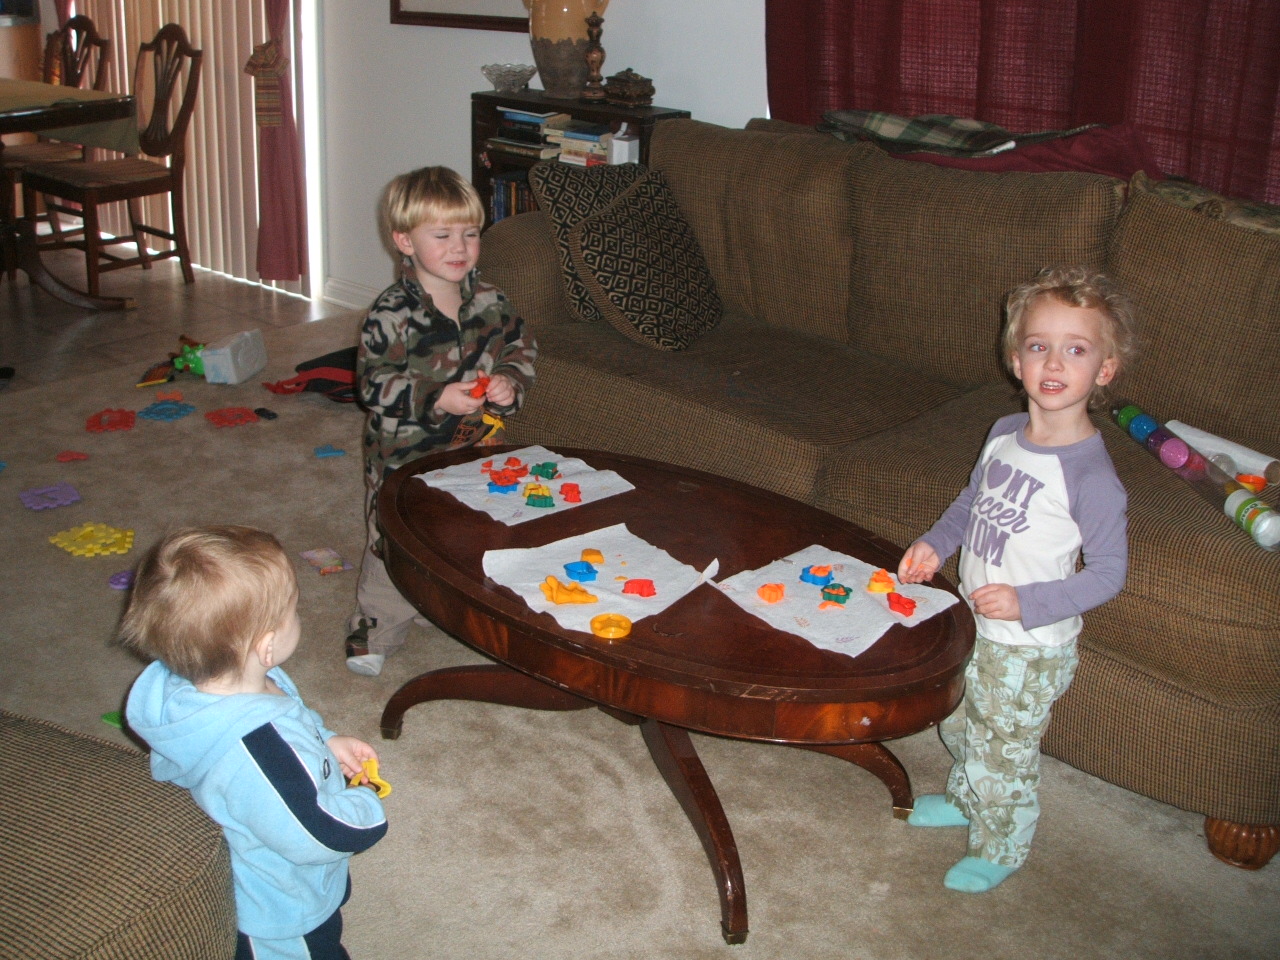 [Sophie,+Mikey,+Derrick+playing+with+playdough+08+001.jpg]